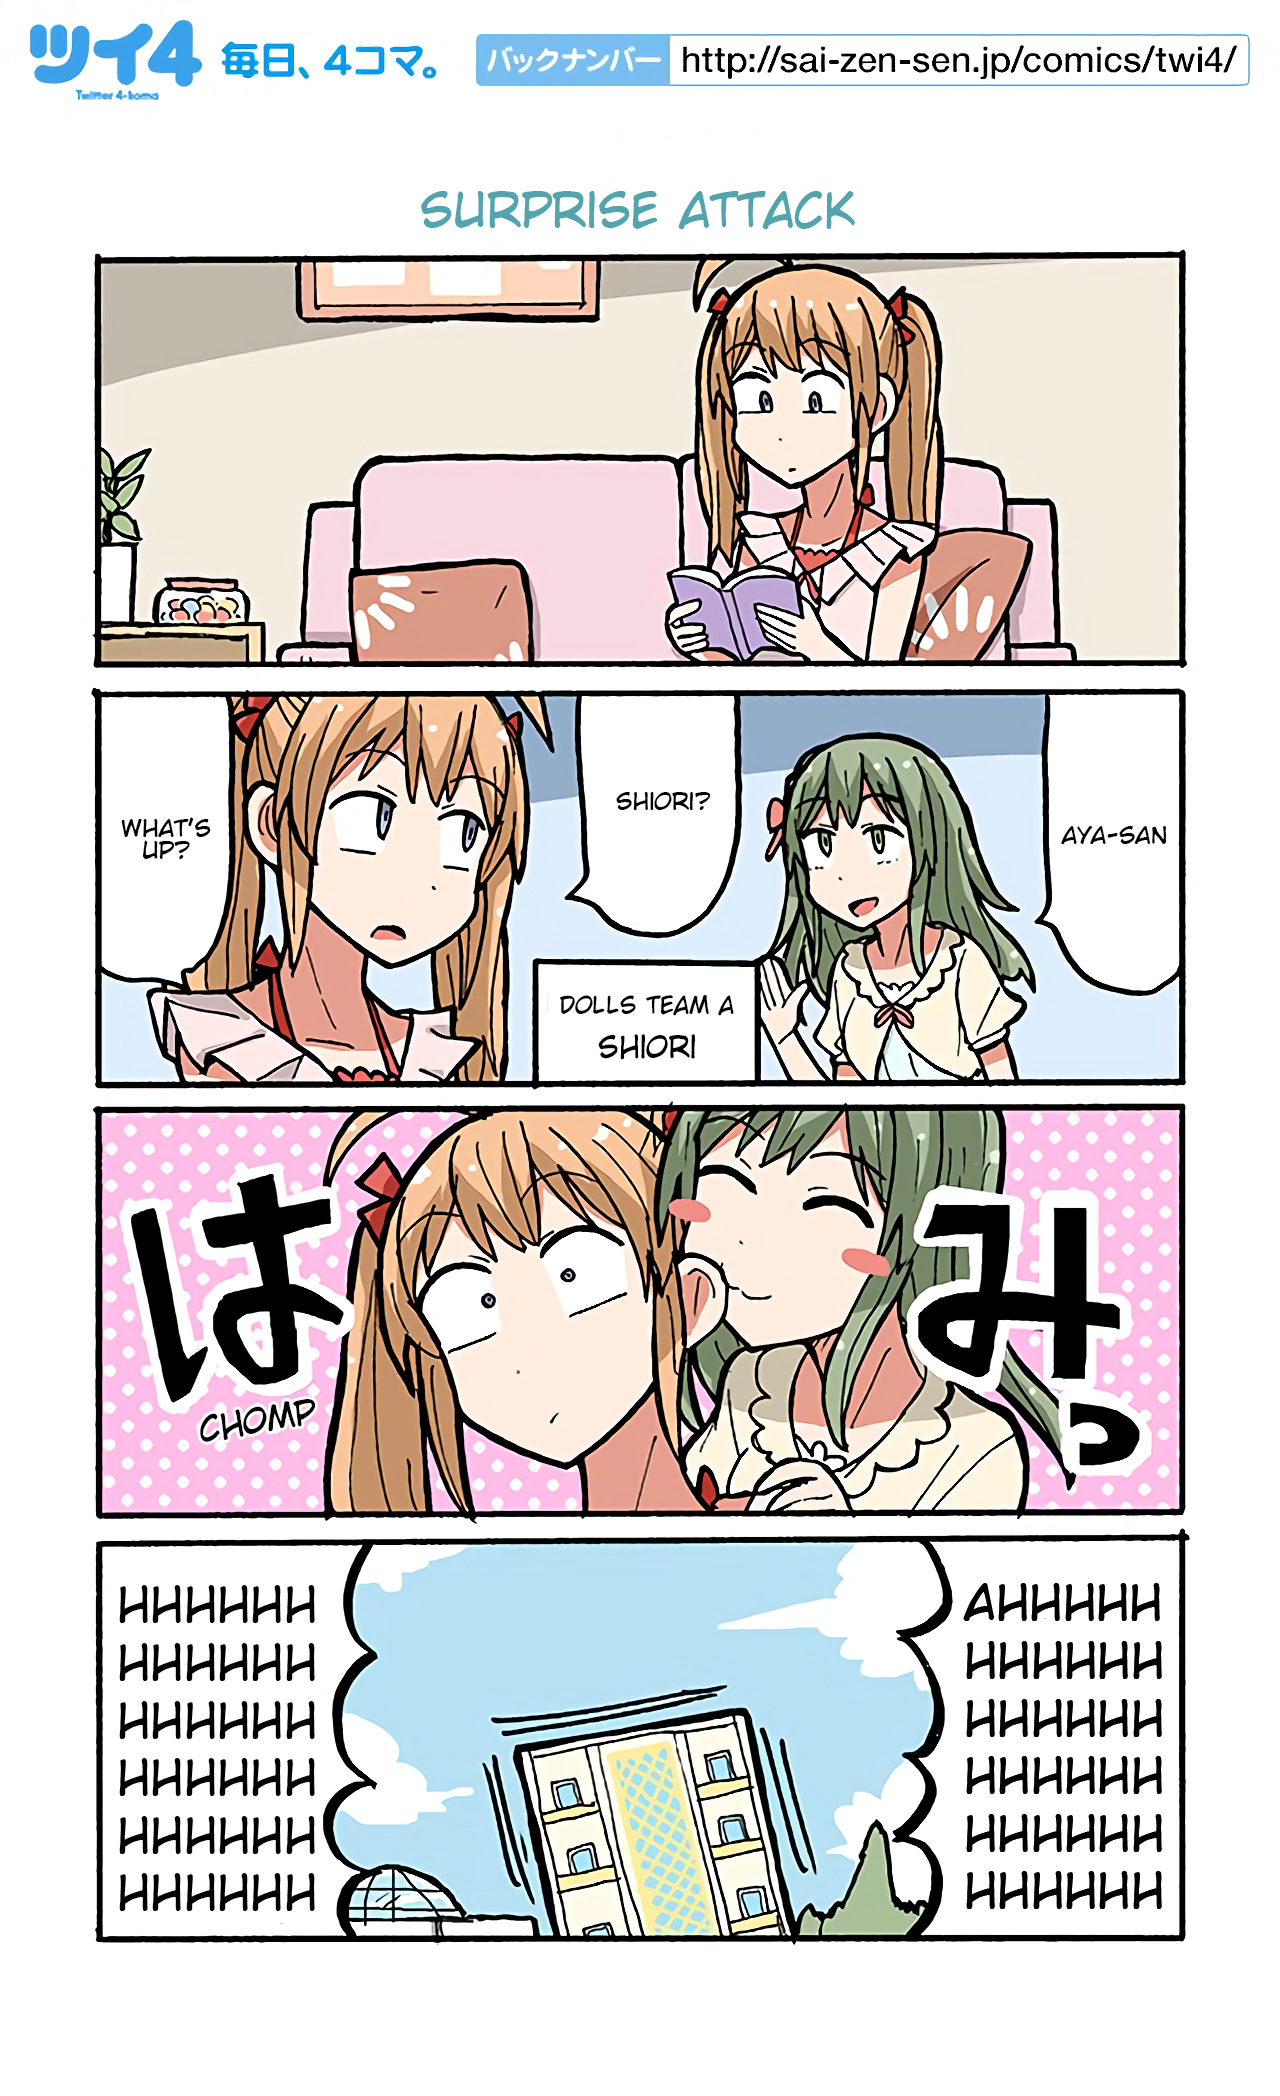 Lazy Idol Yamada's Life as a Youtuber Ch. 62 Surprise Attack